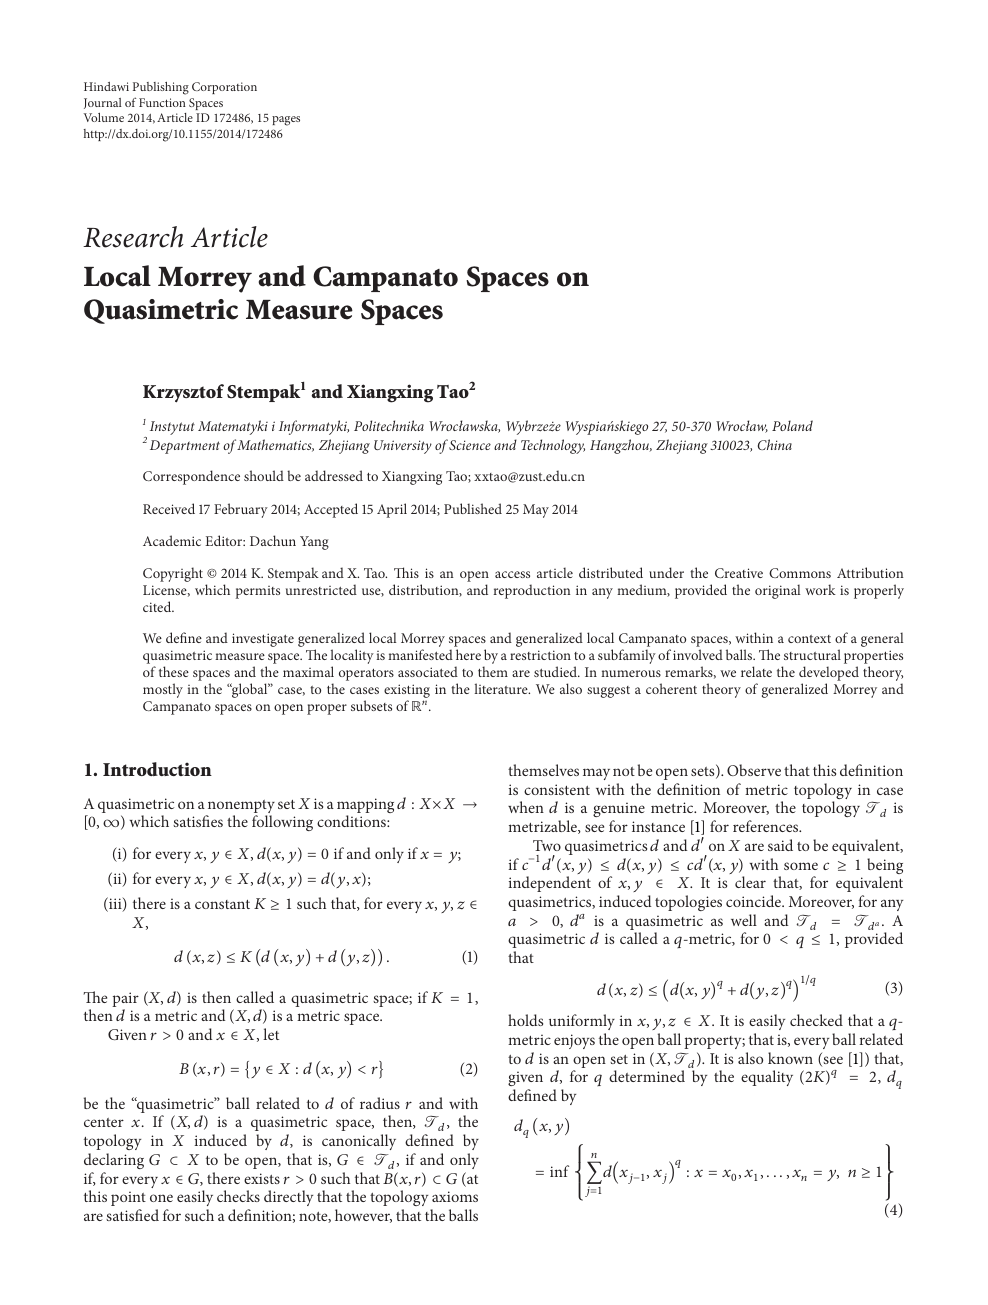 Local Morrey And Campanato Spaces On Quasimetric Measure Spaces Topic Of Research Paper In Mathematics Download Scholarly Article Pdf And Read For Free On Cyberleninka Open Science Hub